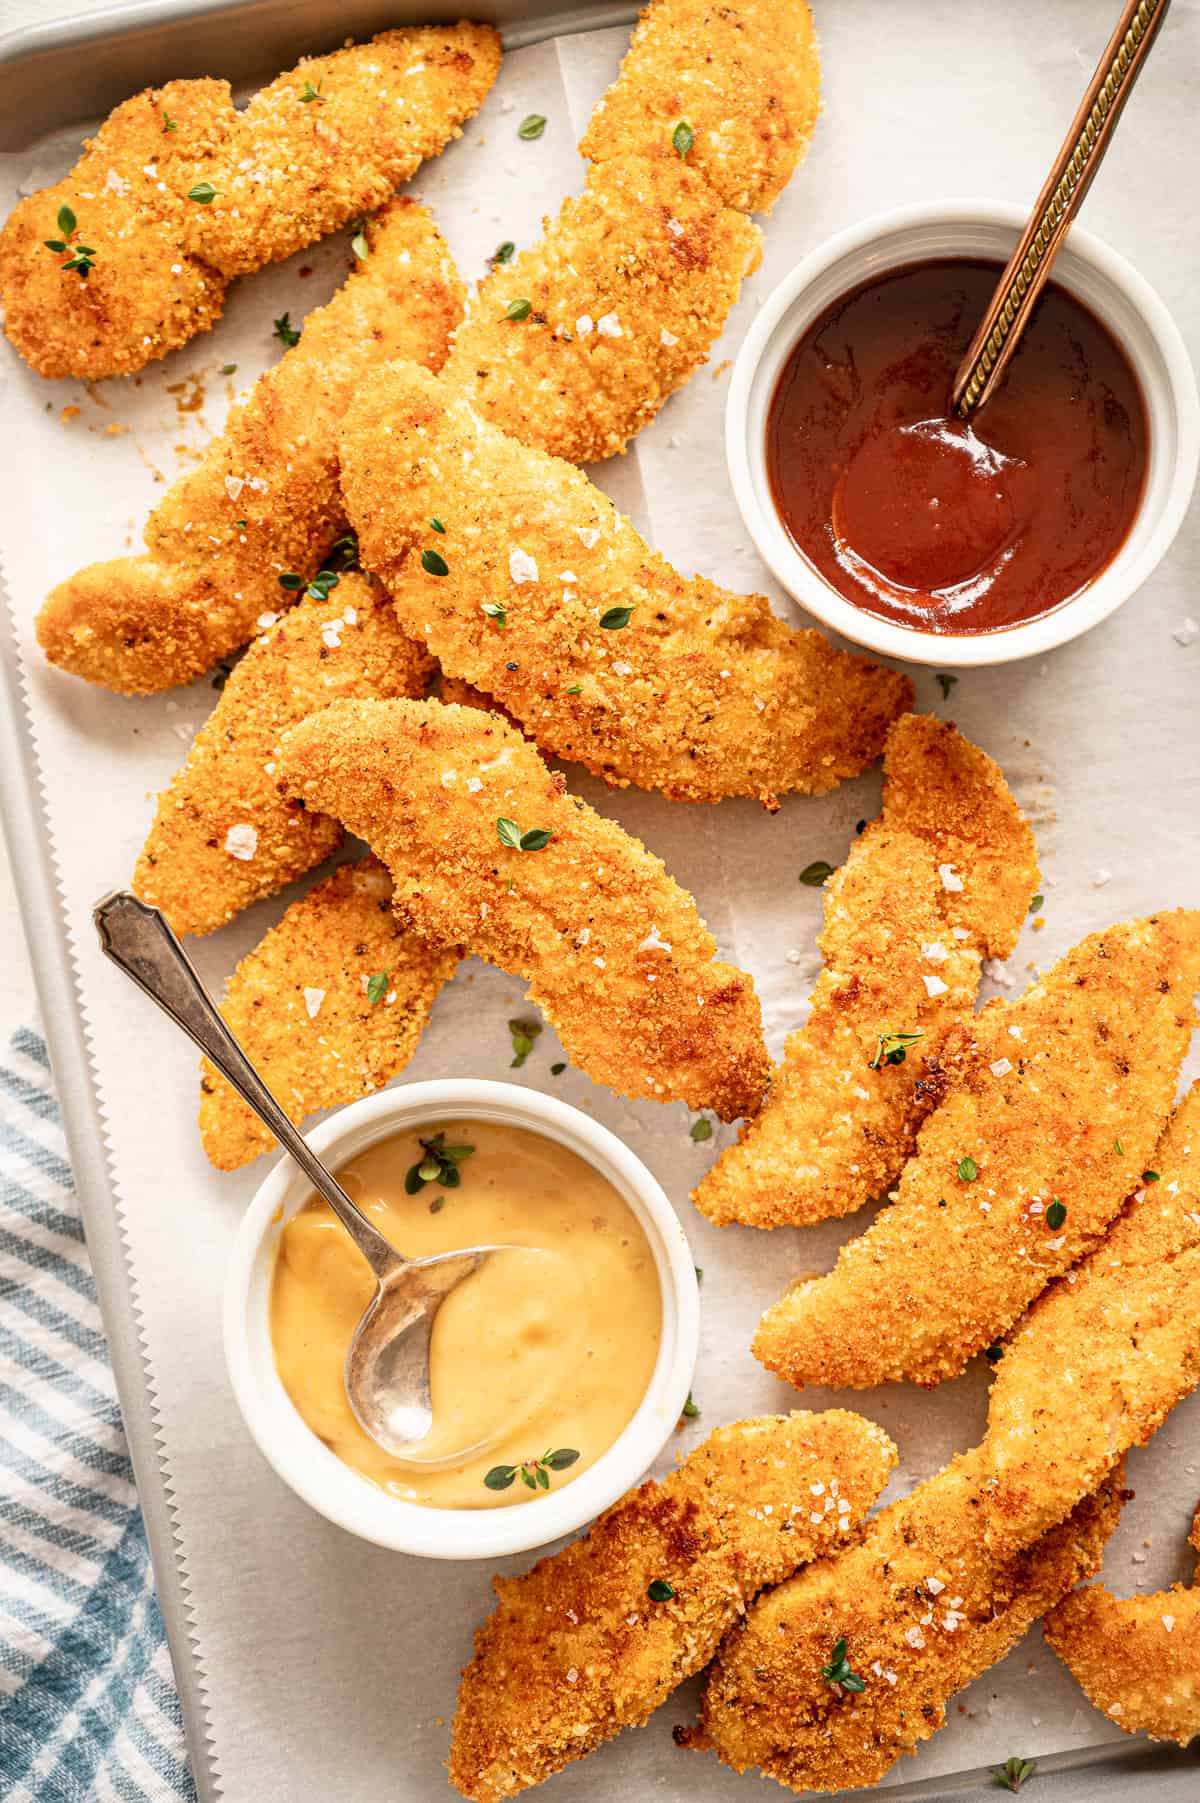 Baked Parmesan Chicken tenders on a sheet pan with dipping sauces.